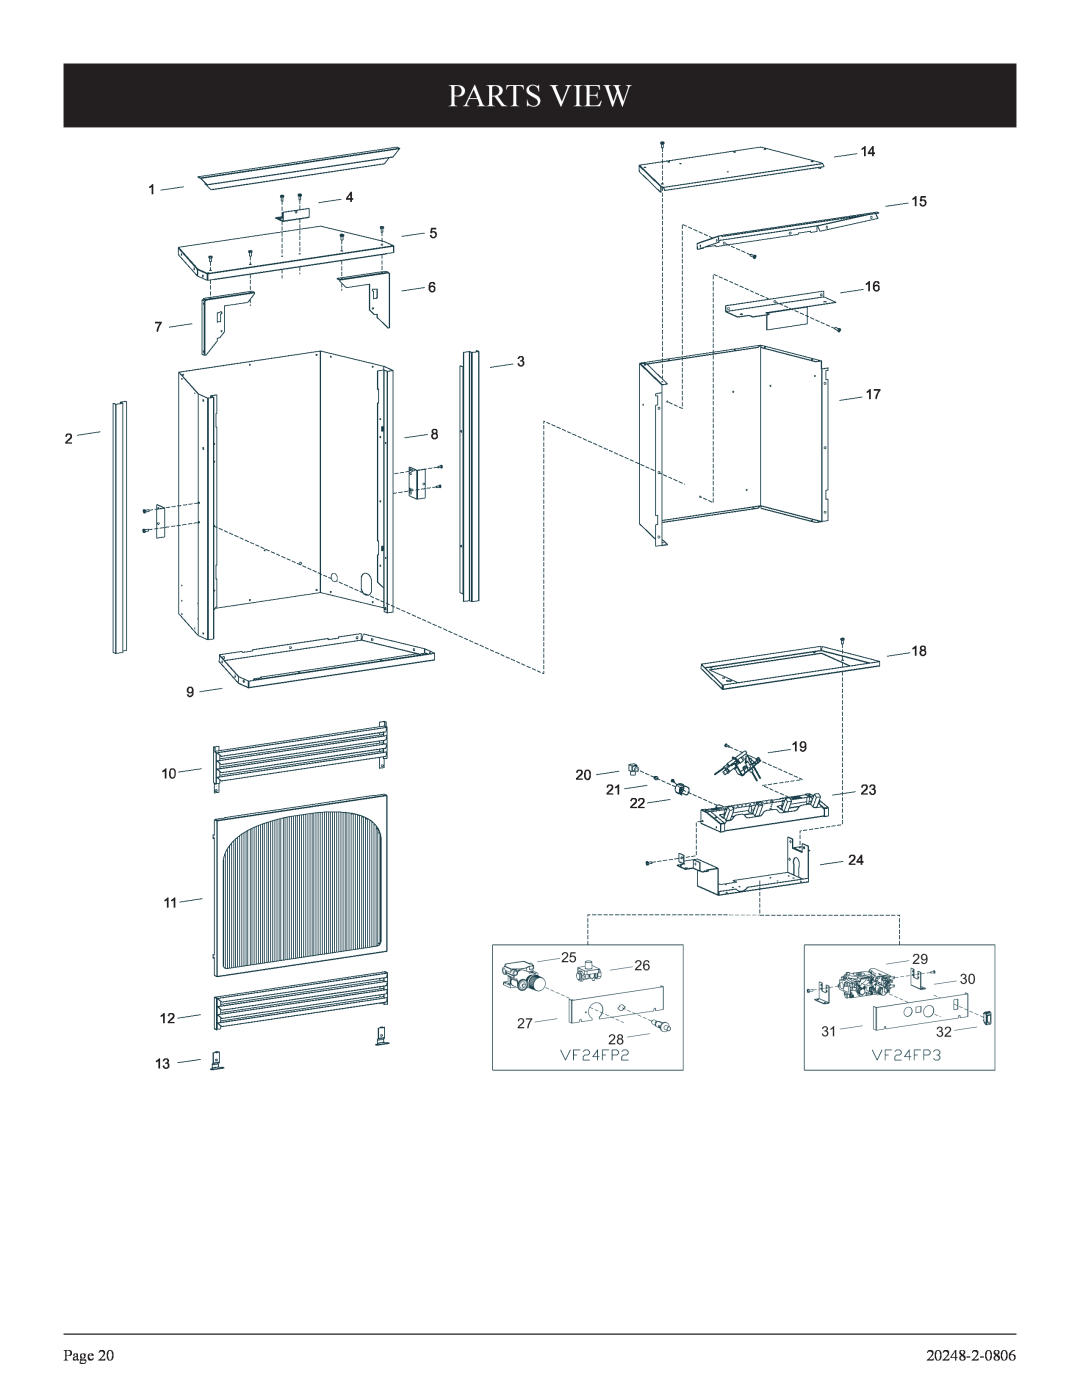 Empire Comfort Systems VF24FP2-1, VF24FP3-1 installation instructions Parts View, Page, 20248-2-0806, 2727, 2828 